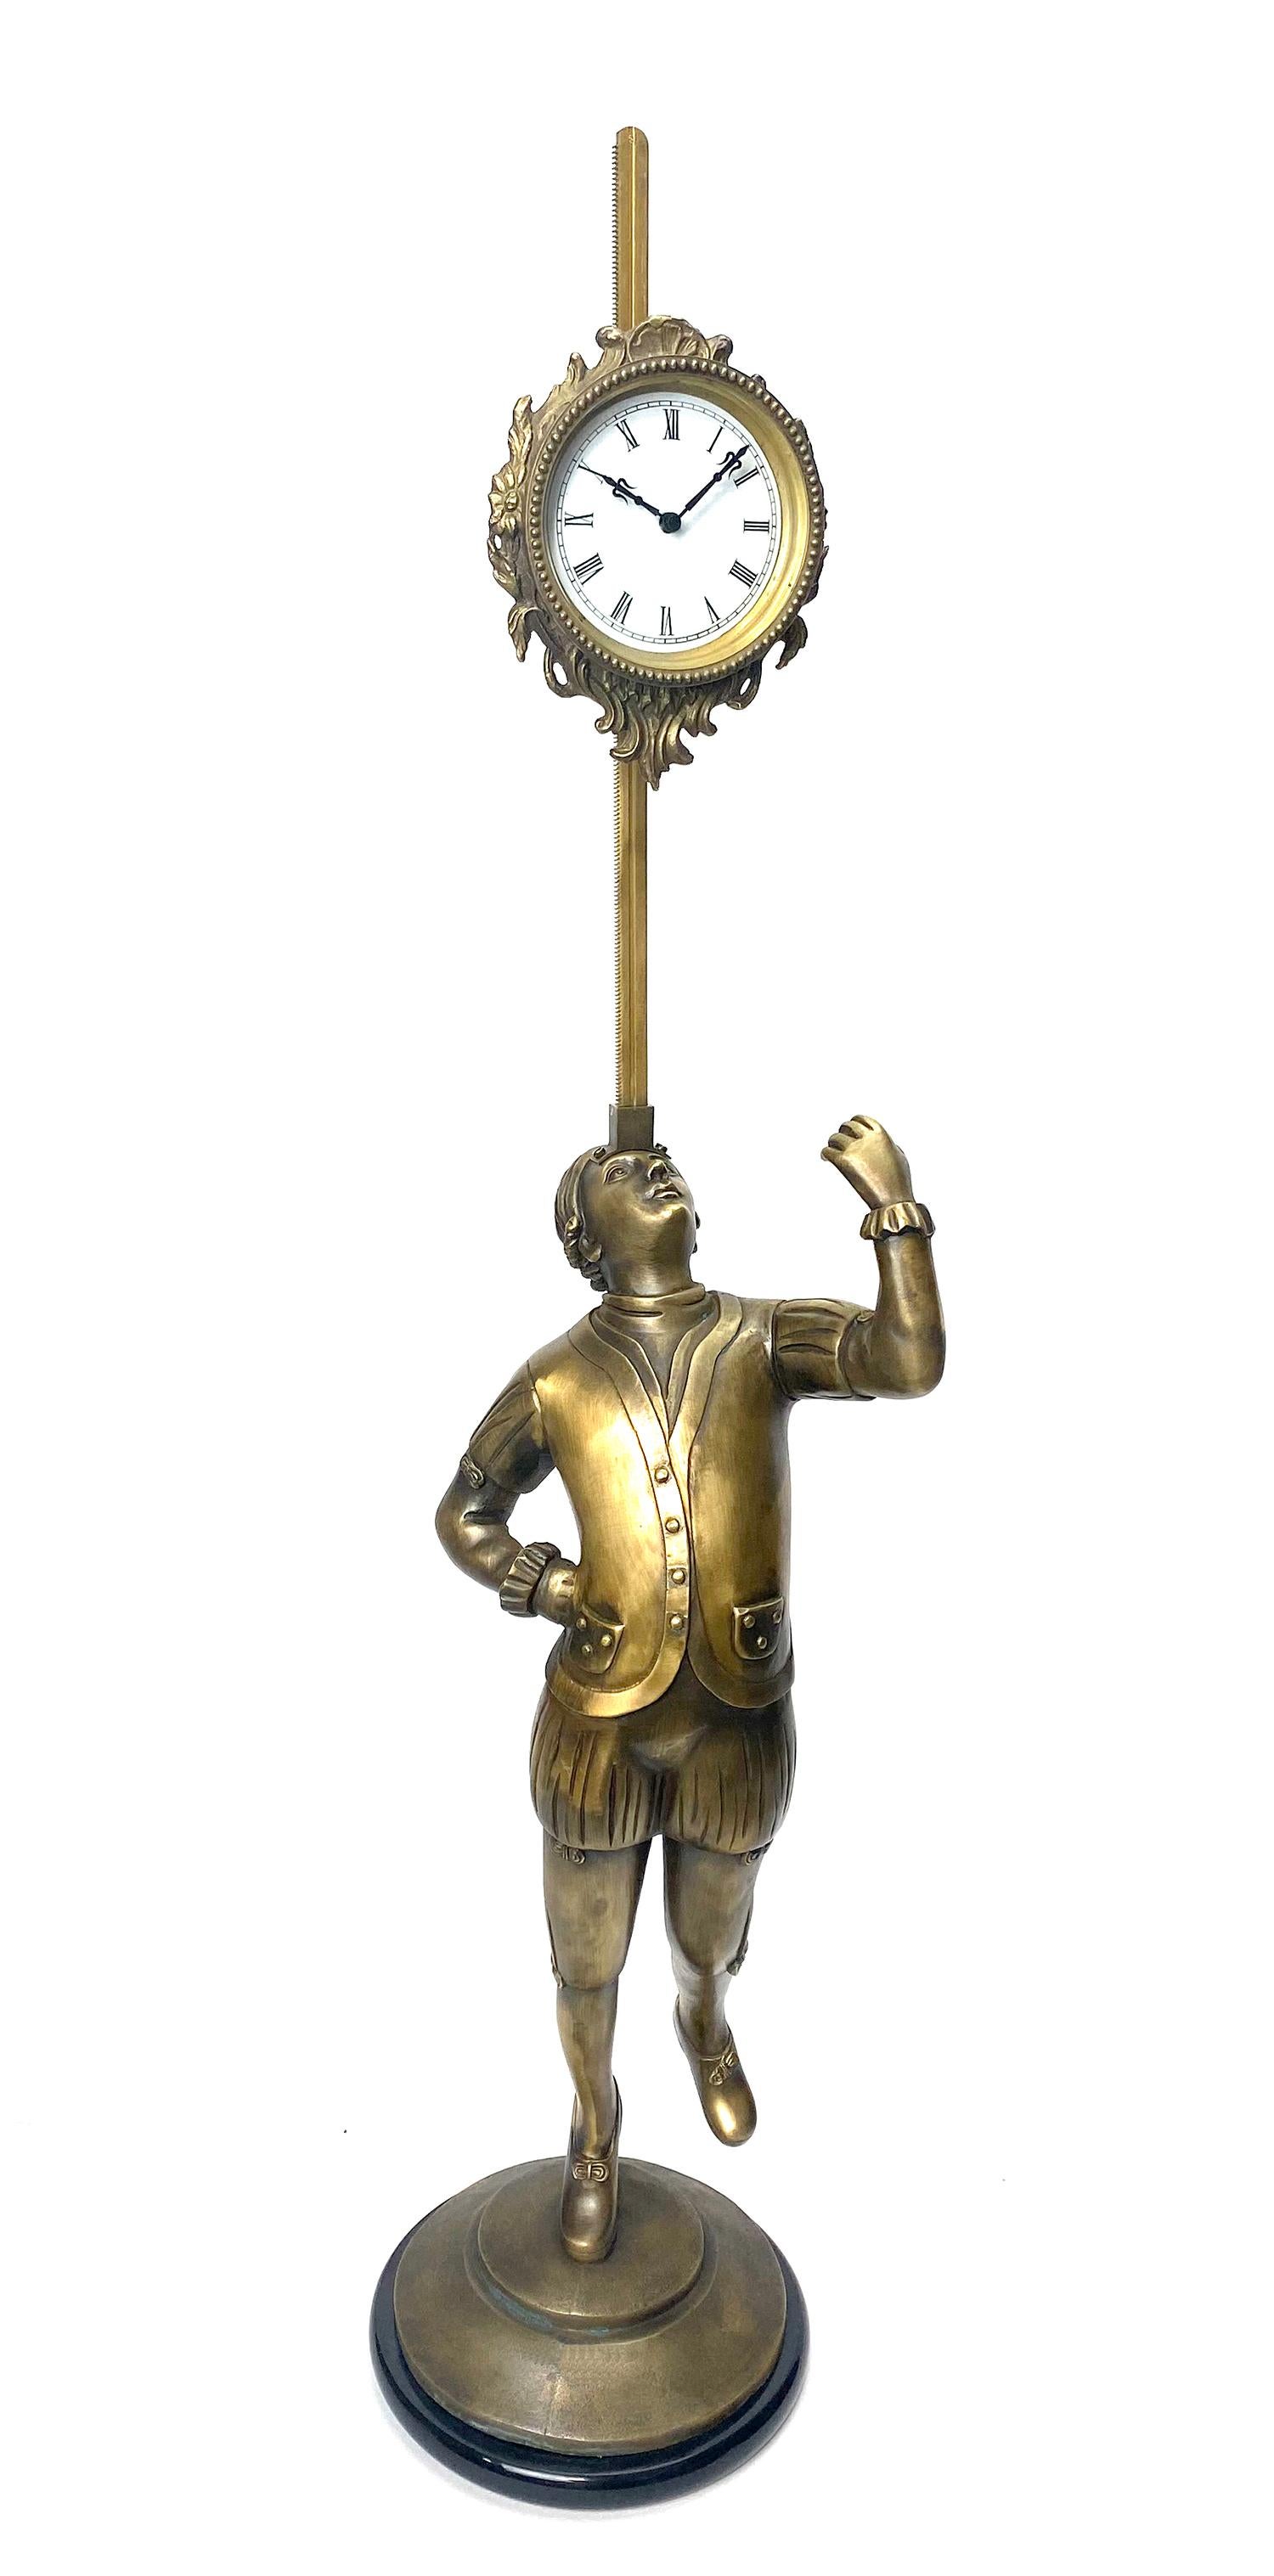 Large Bronze Acrobat Figure Sawtooth Gravity Driven Falling Clock w Marble Base

Here is another very interesting clock from our collection. It's a large bronze statue clock, an acrobat figure juggling a clock set on a sawtooth rod. The figure